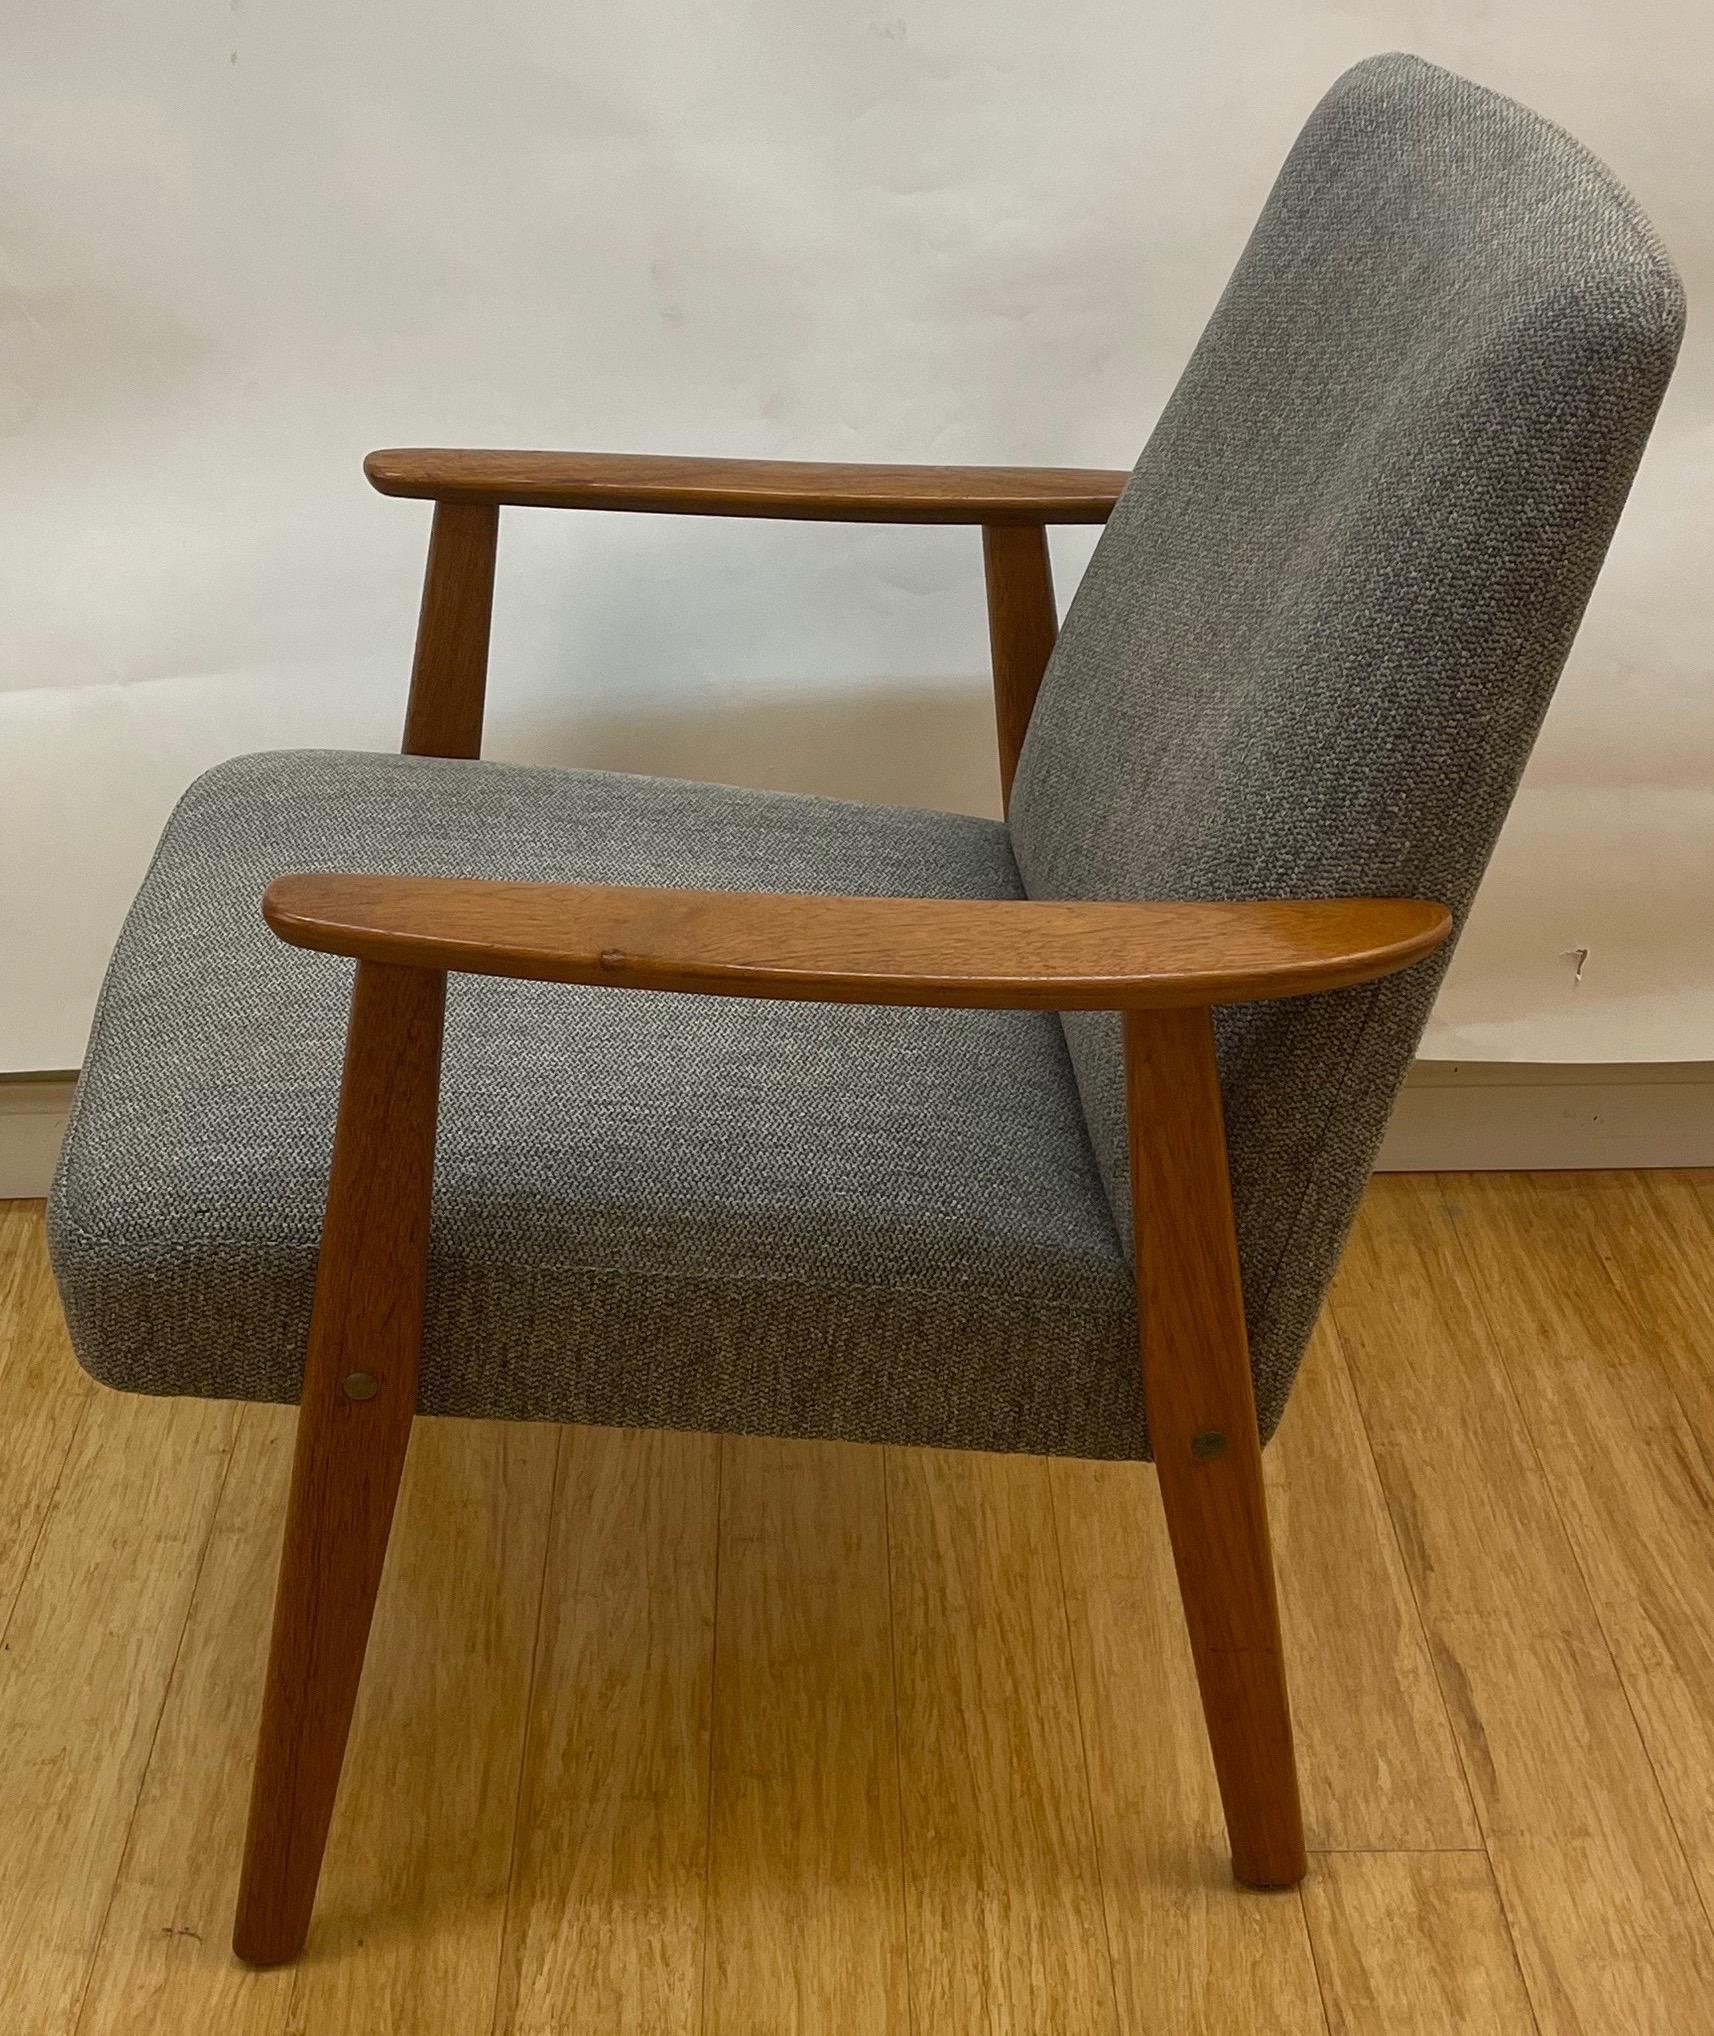 These sleek chairs are perfectly proportioned in the minimalist style of the mid century.  Lightweight, but made from teak- a strong tropical hardwood they are sprung and cushioned in both seat and back.